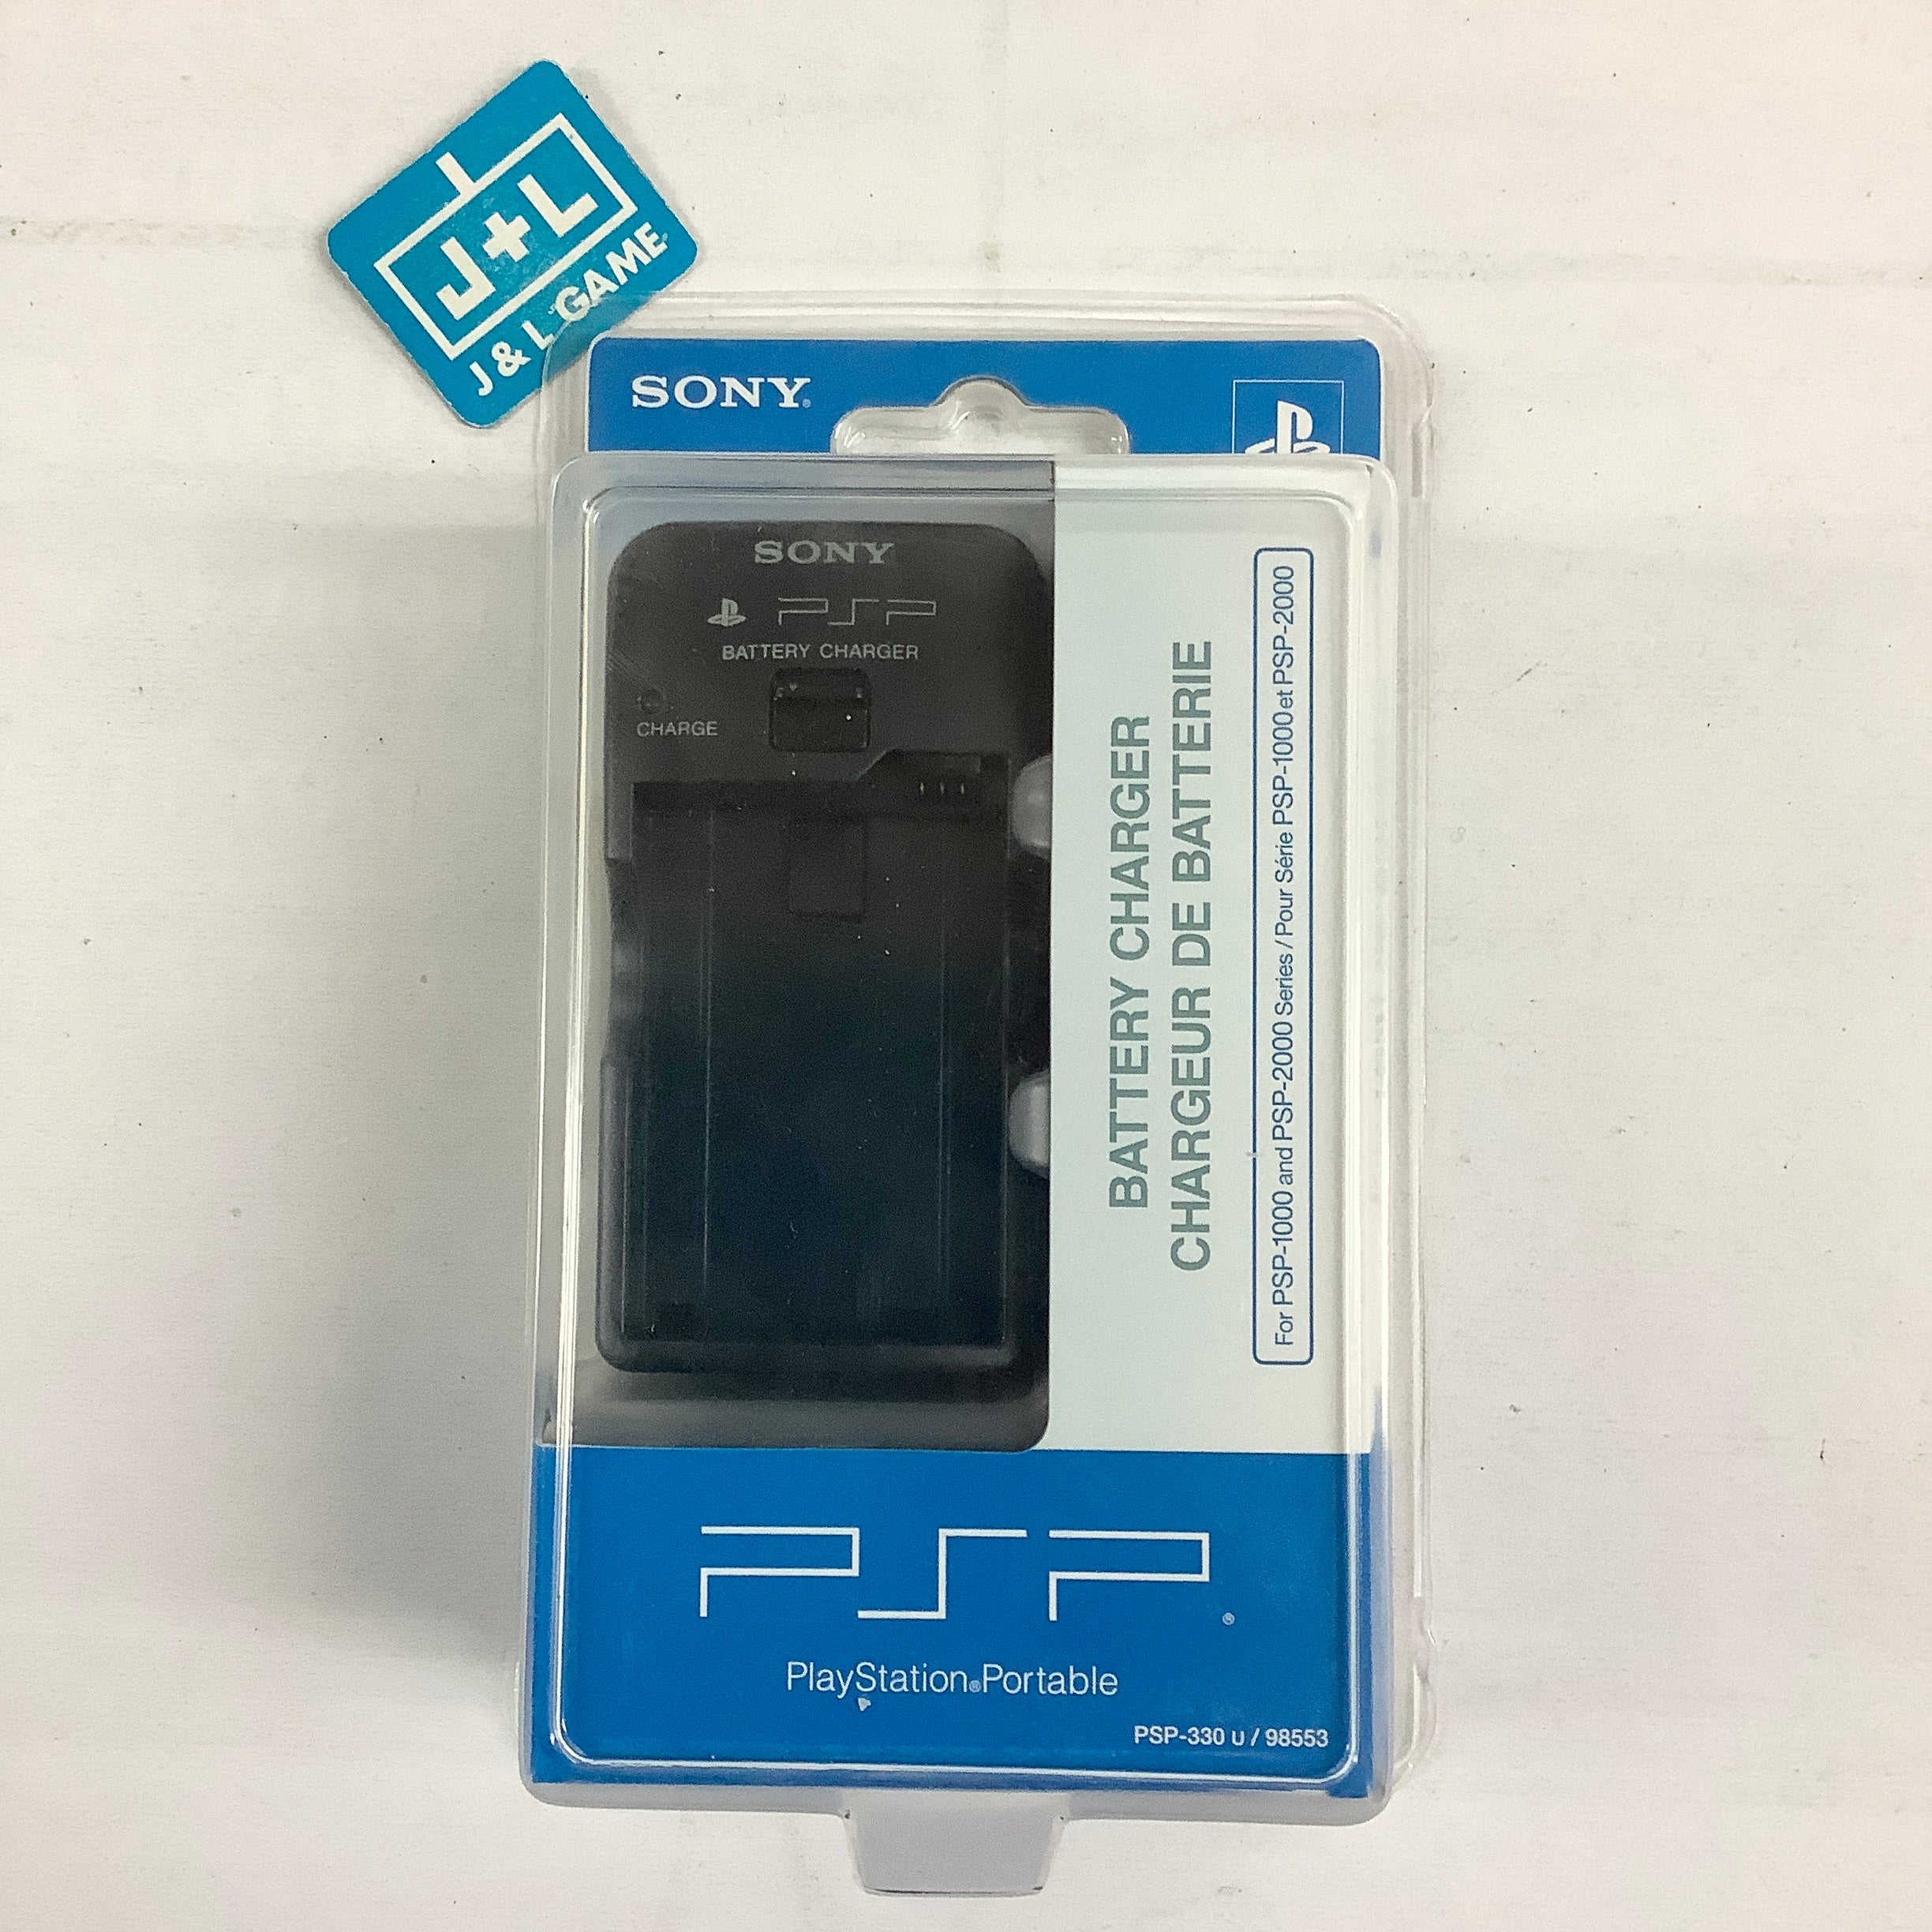 Sony PSP Battery Charger - Sony PSP Accessories PlayStation   